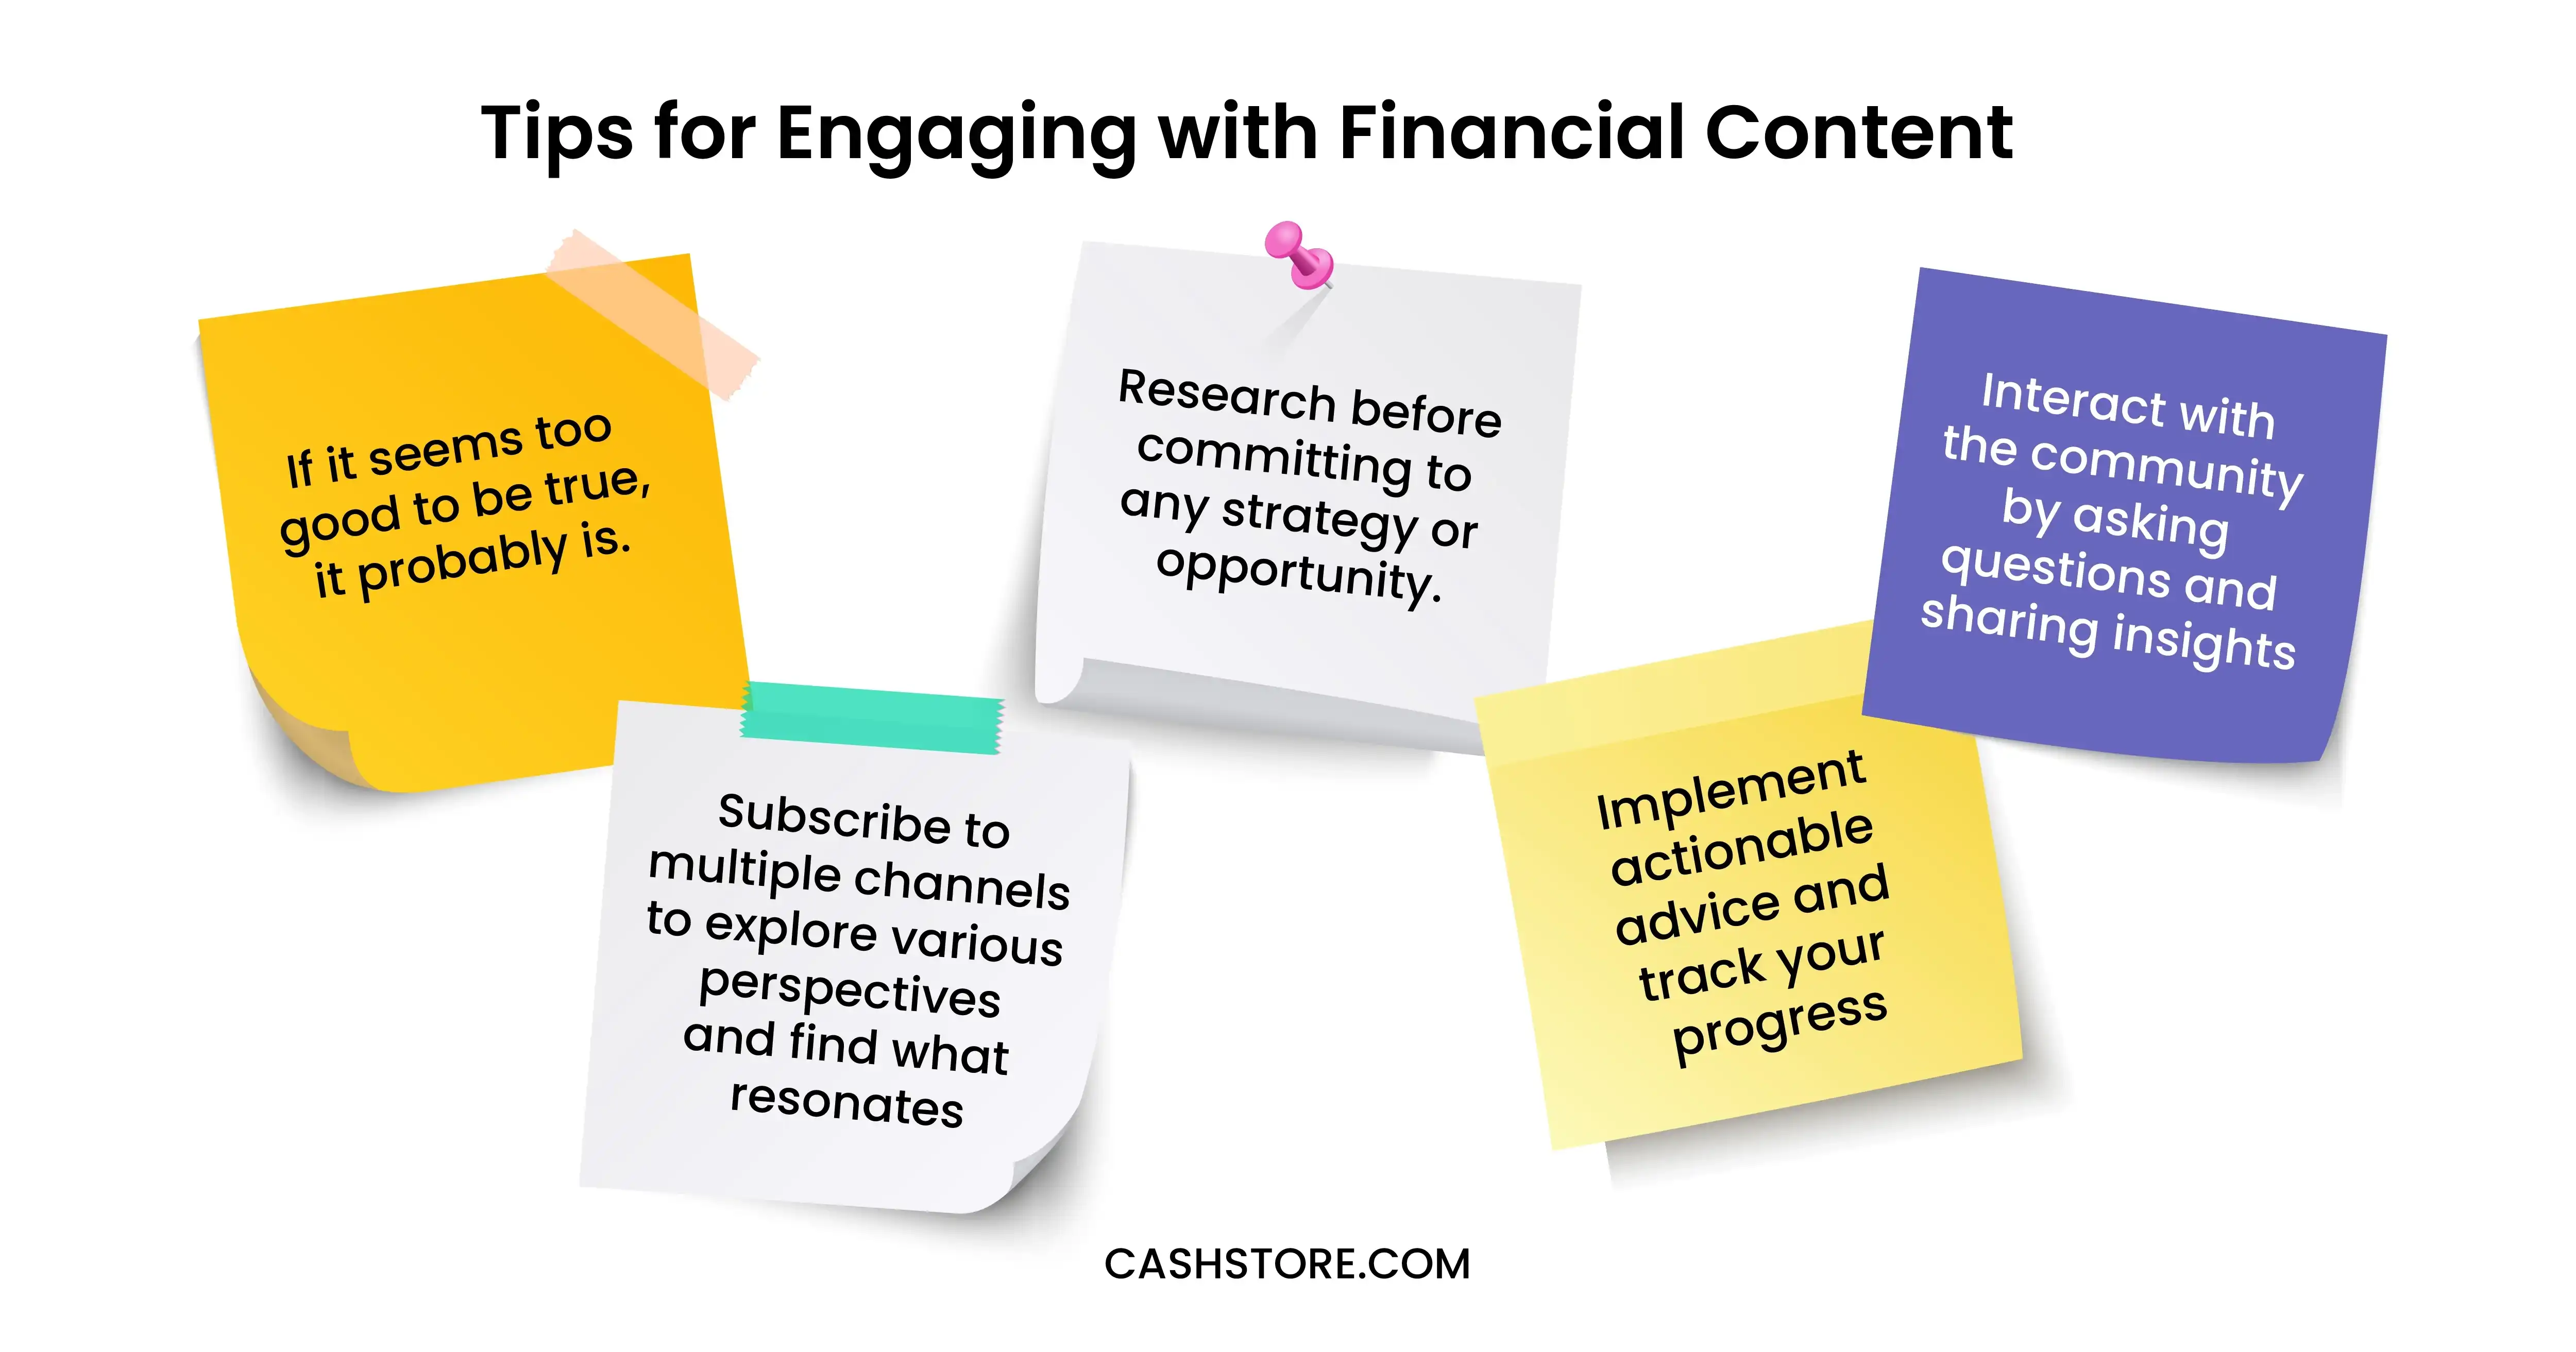 Tips for Engaging with Financial Content